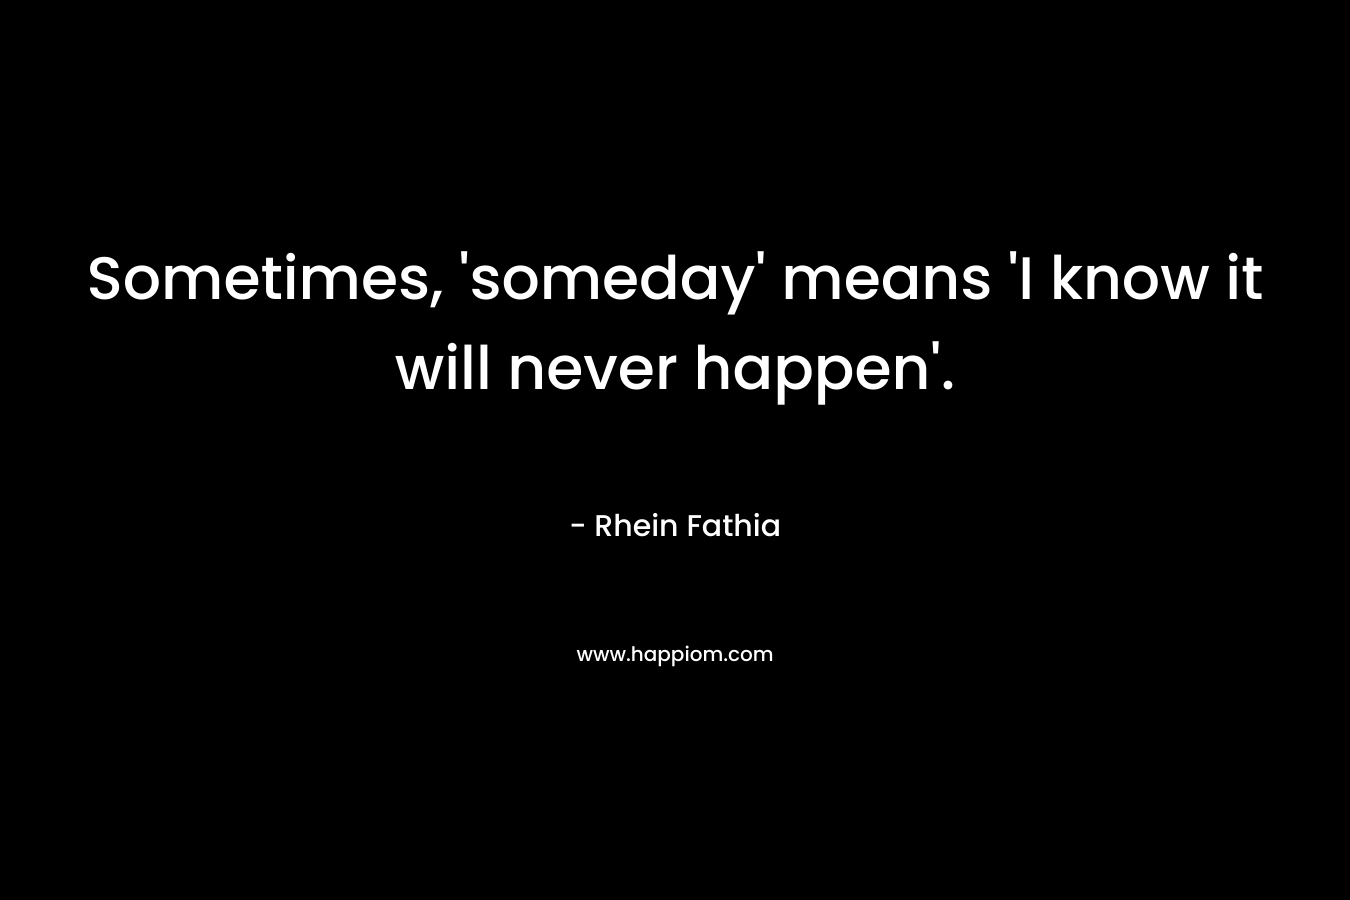 Sometimes, 'someday' means 'I know it will never happen'.